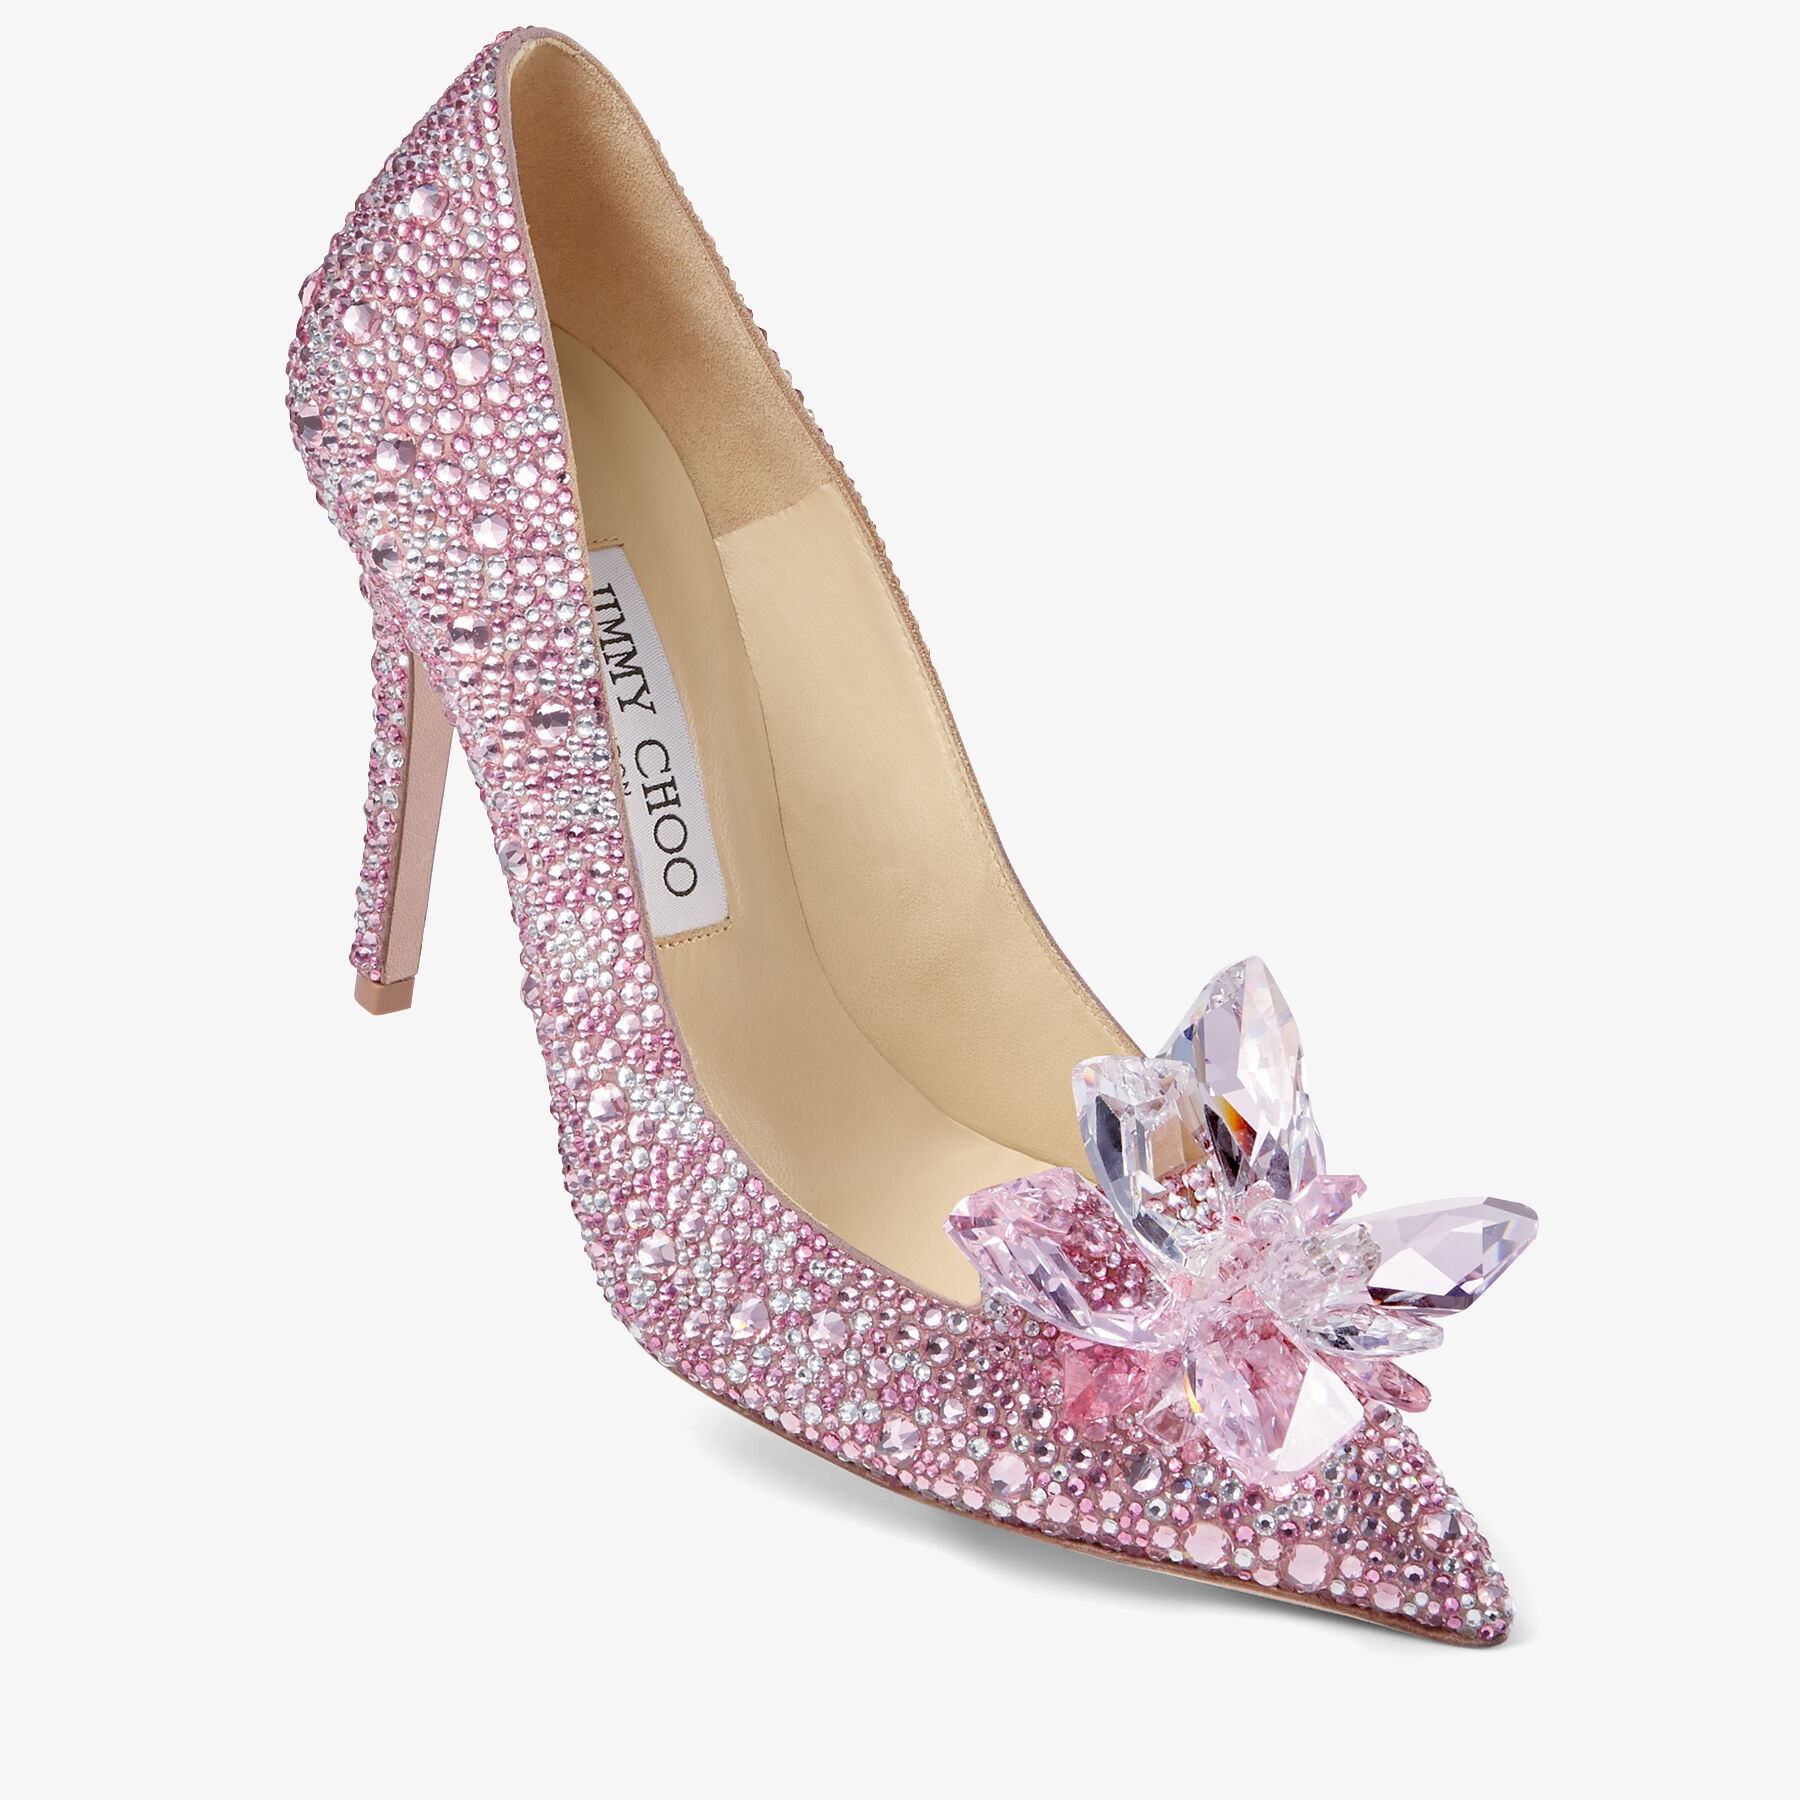 Avril
Rose Mix Suede and Crystal Covered Pointy Toe Pumps - 3